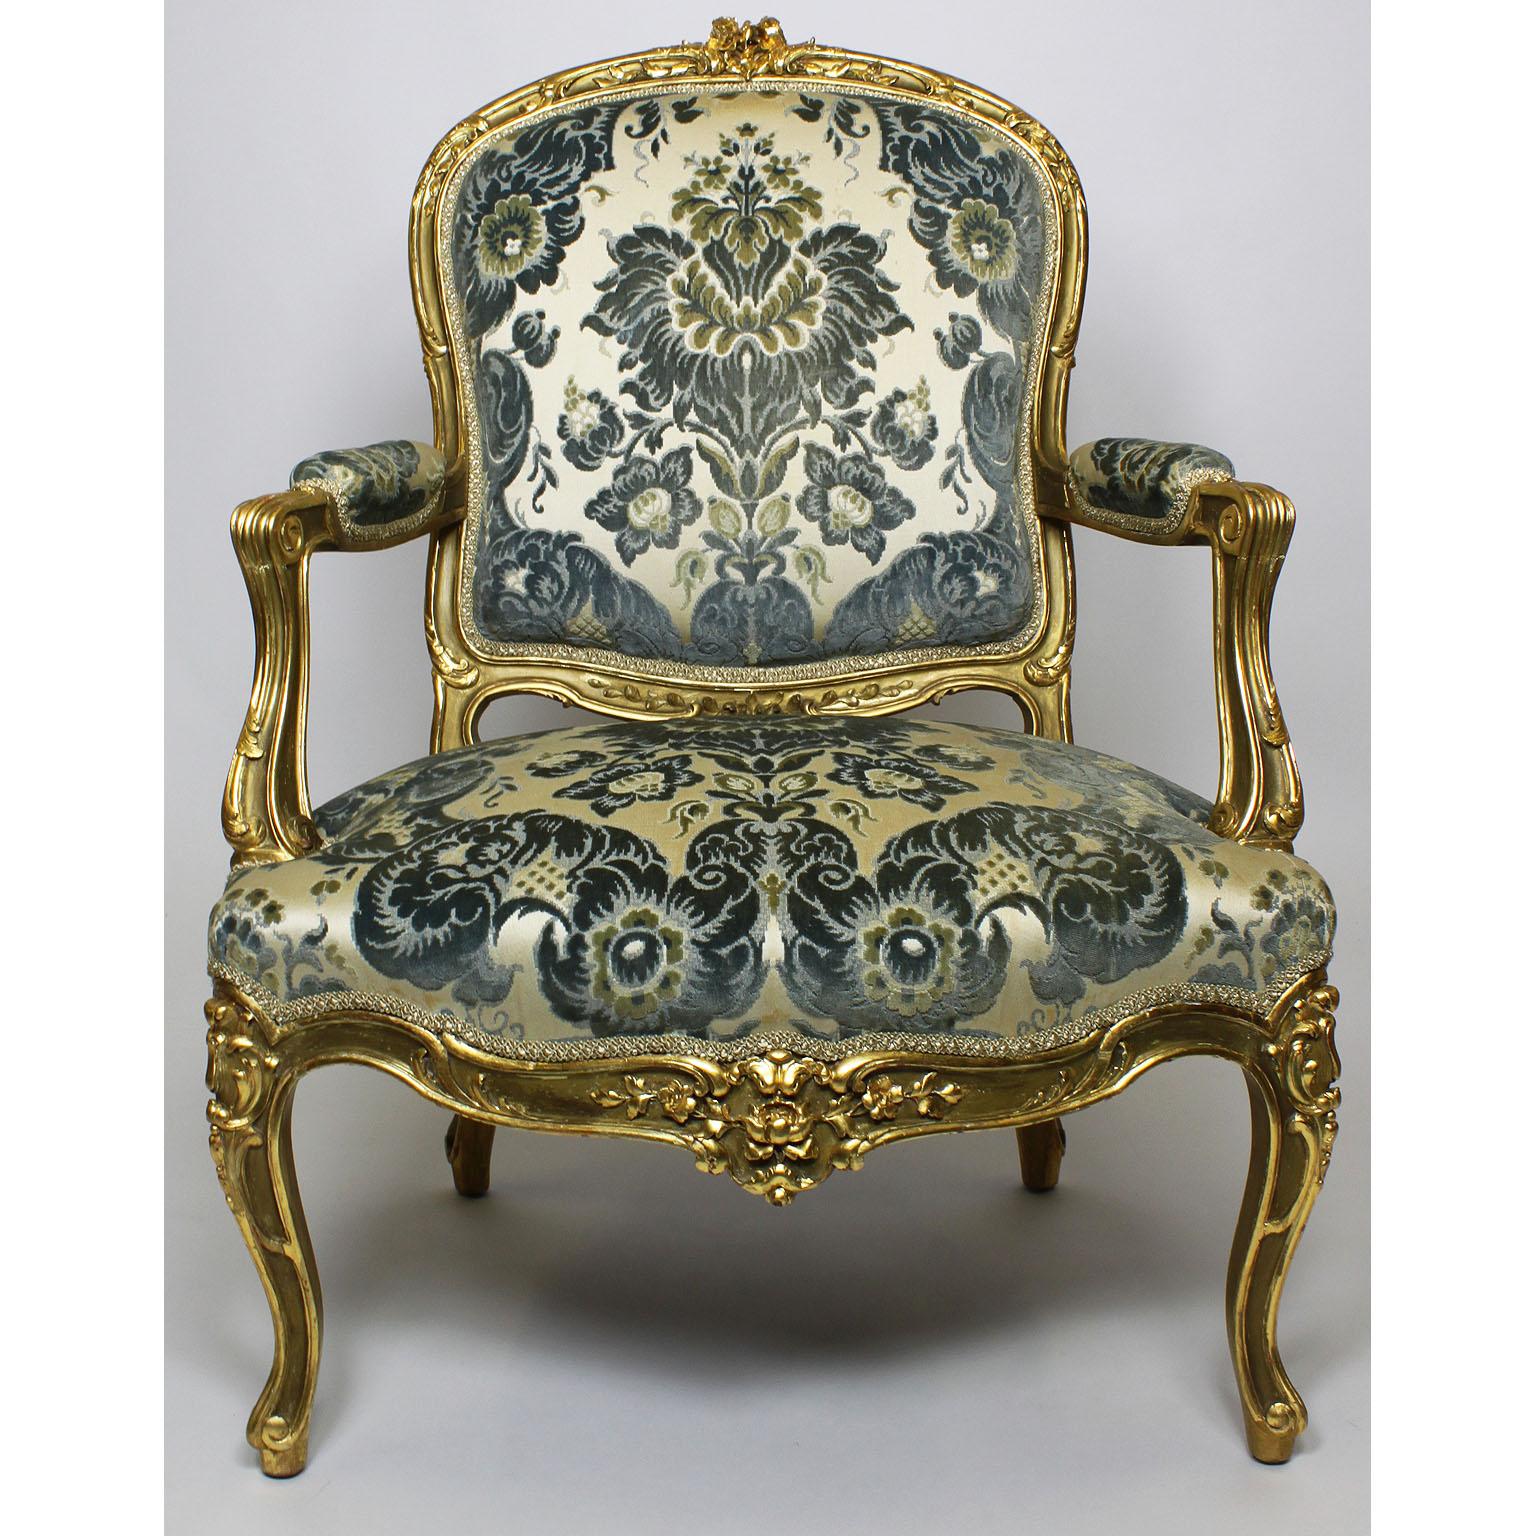 A fine pair of French 19th-20th century Louis XV style two-tone giltwood carved Rococo fauteuils (Armchairs). The intricately carved wood frames with open scrolled and padded armrests and cabriolet legs. Upholstered in a Baroque blue and cream